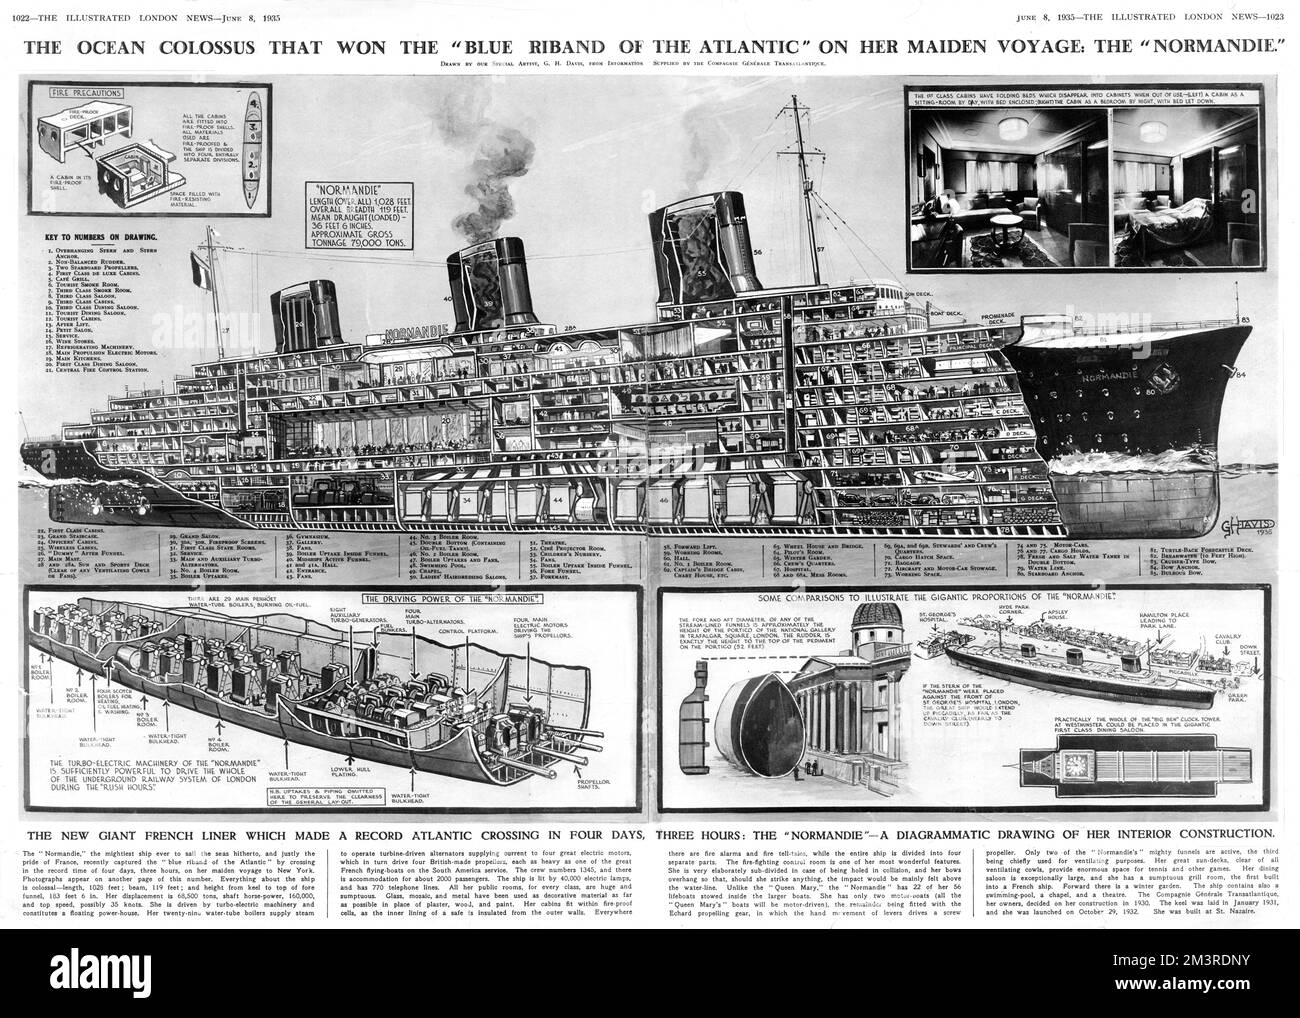 The new giant French ocean liner which made a record Atlantic crossing in four days, three hours: the &quot;Normandie&quot; - a diagrammatic drawing of her interior construction by G. H. Davis in the Illustrated London News. Also shown are comparisons with Big Ben and the National Gallery to get some sense of the ship's enormous size.  Also the turbo-electric machinery  which was, according to this illustration, 'sufficiently powerful to drive the whole of the underground railway system of London during rush hours.'  In the top right are photographs showing the foldaway beds in first clas Stock Photo